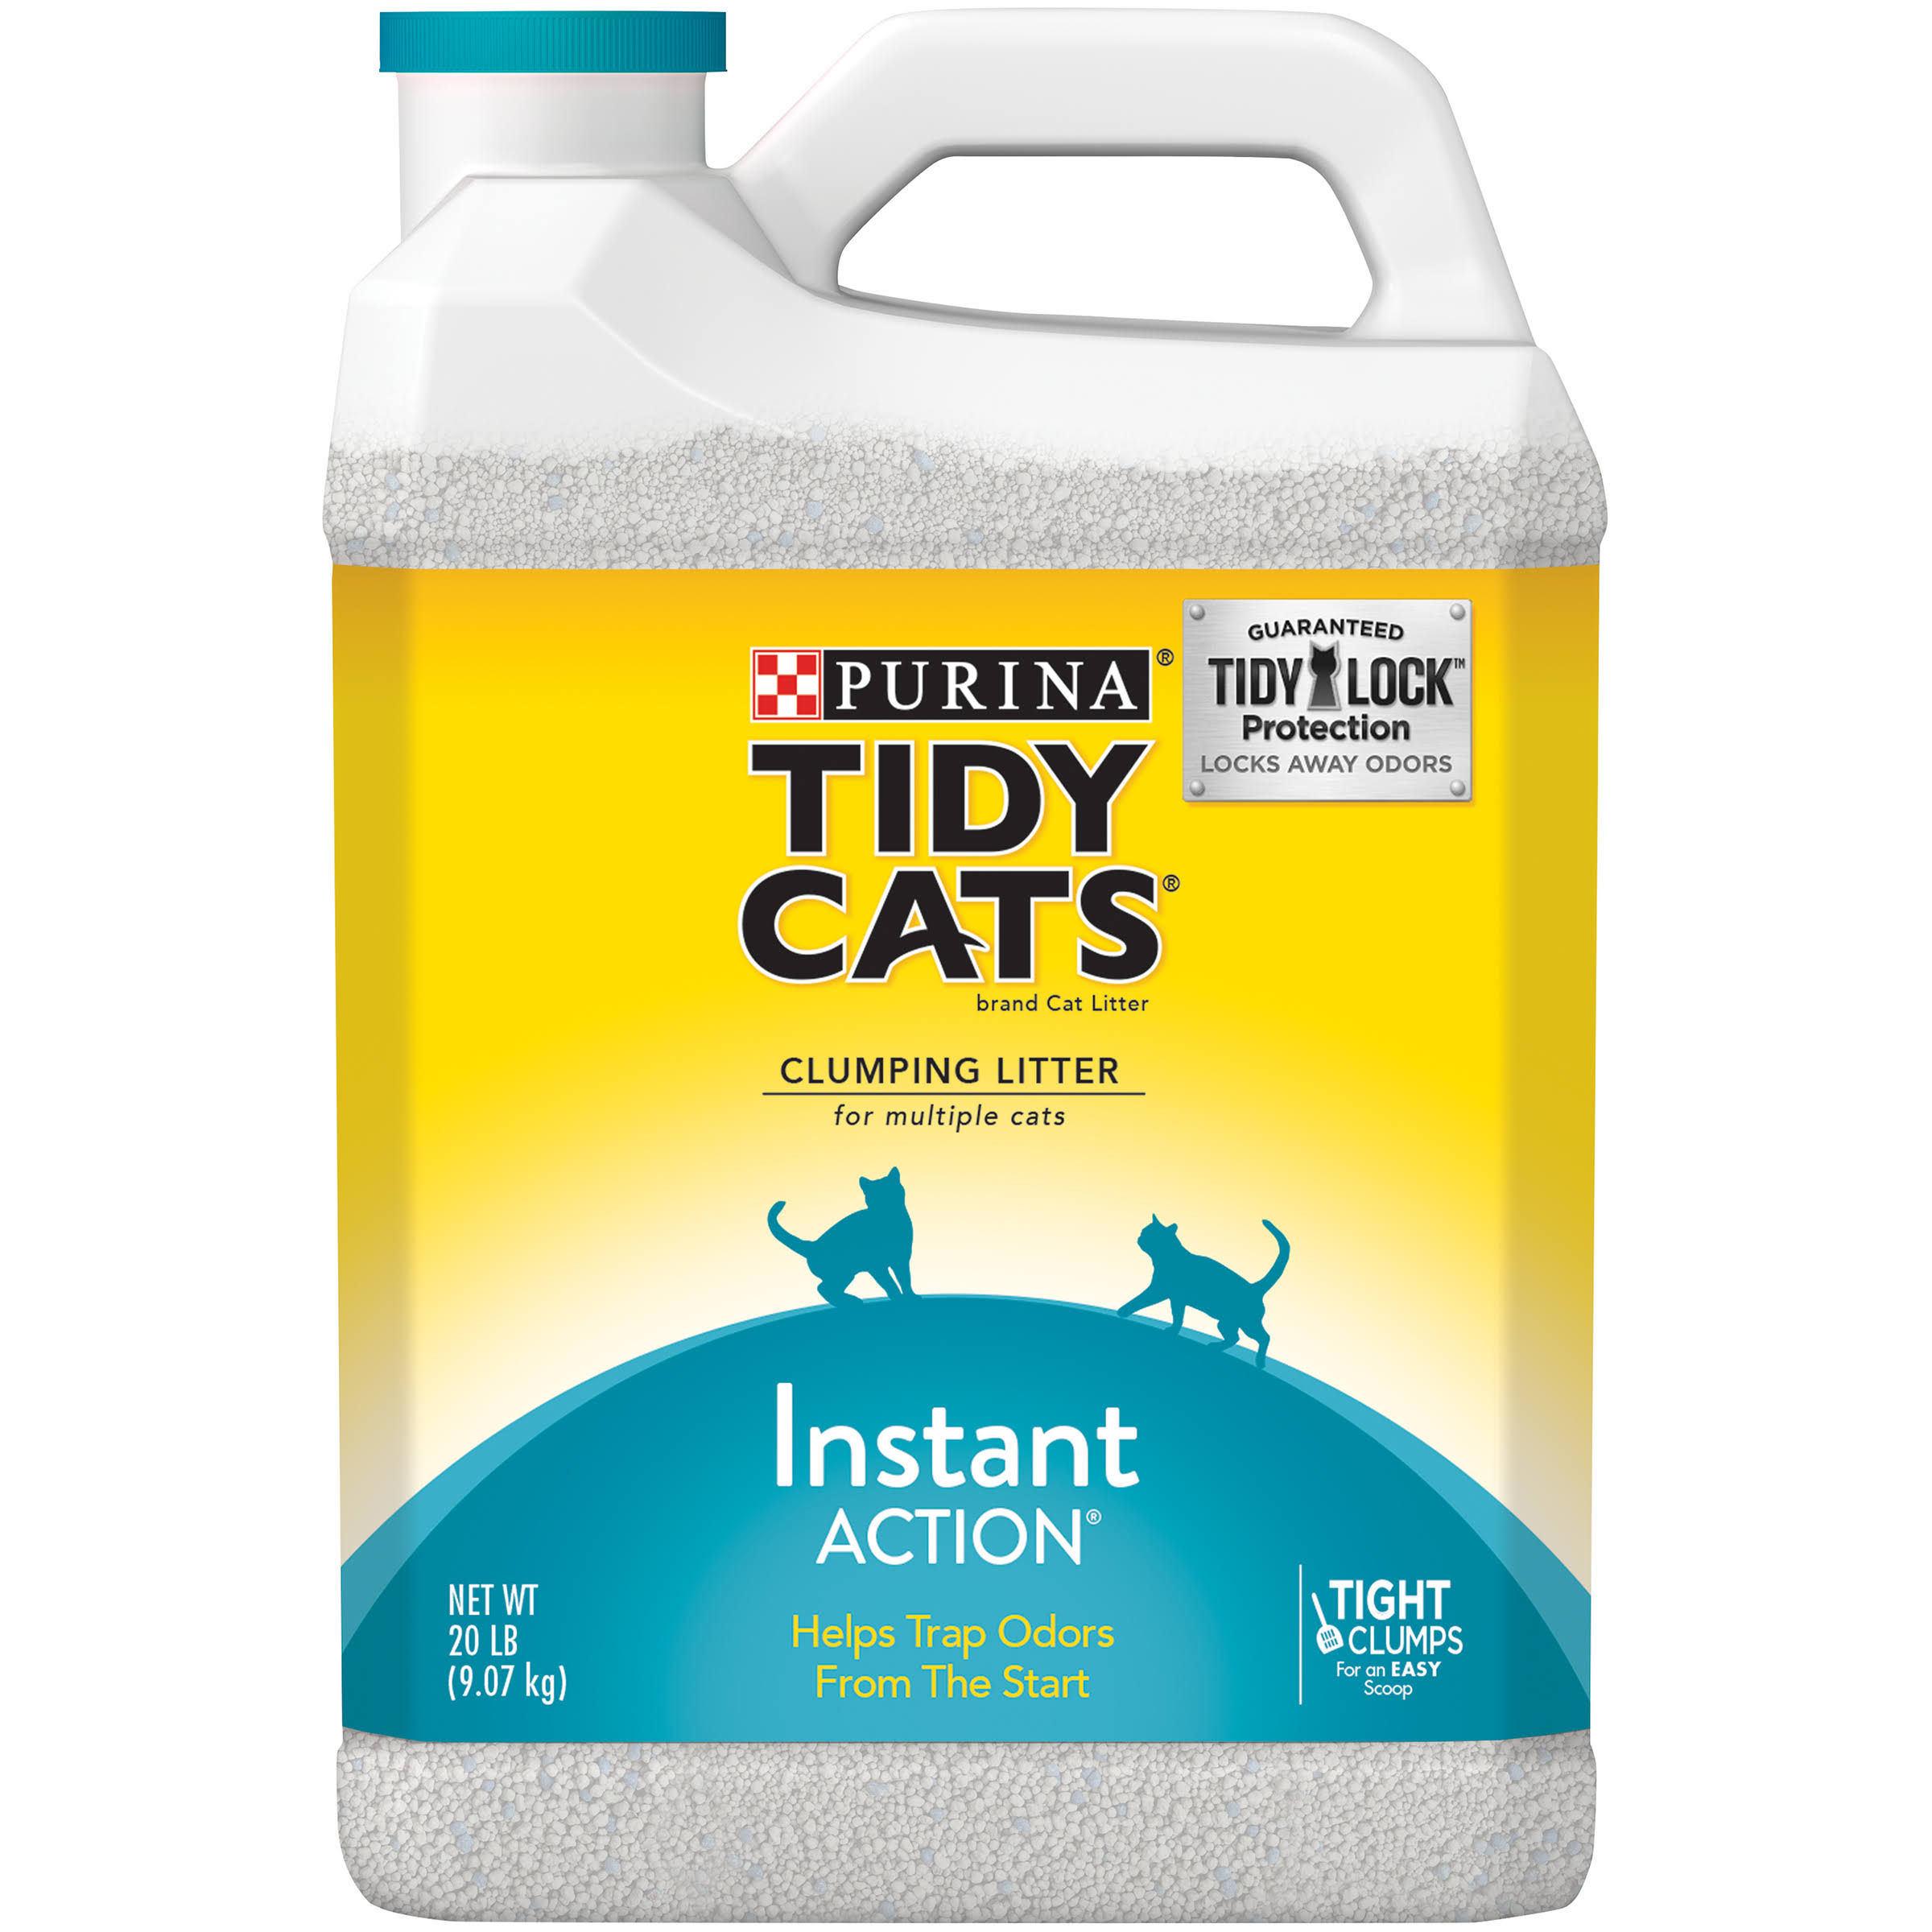 Purina Tidy Cats Instant Action Clumping Litter - 20lb